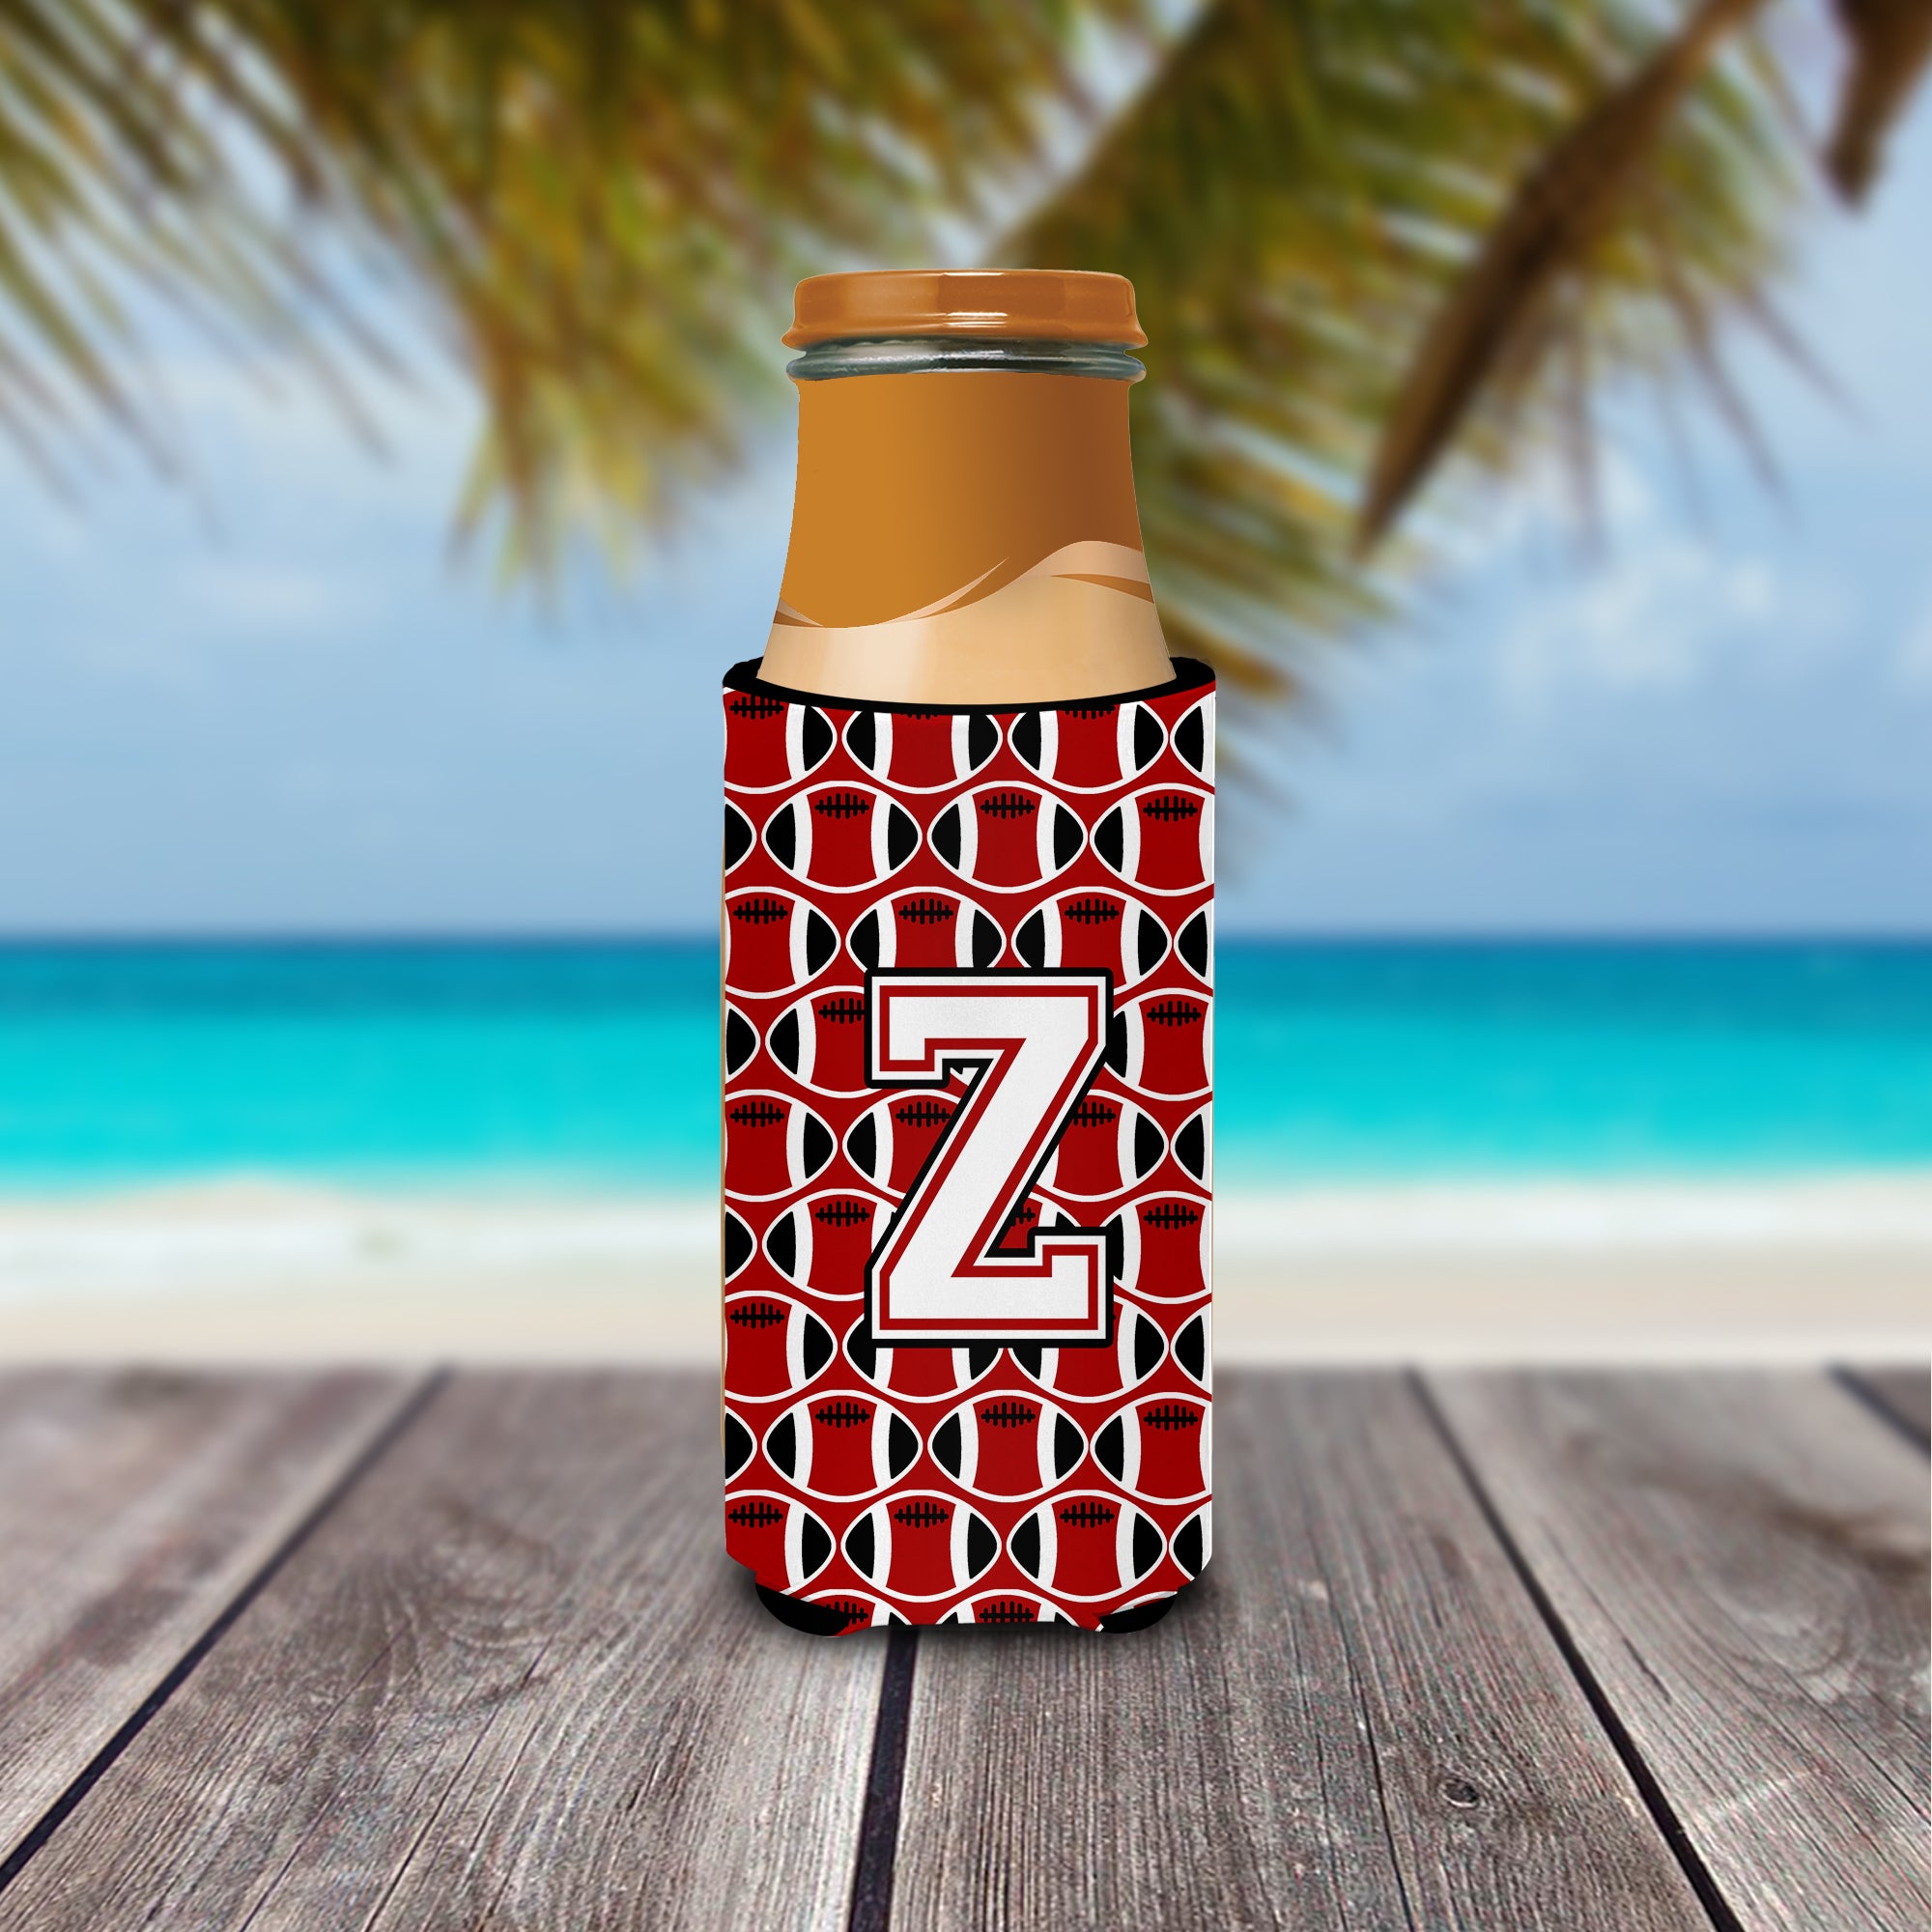 Letter Z Football Cardinal and White Ultra Beverage Insulators for slim cans CJ1082-ZMUK.